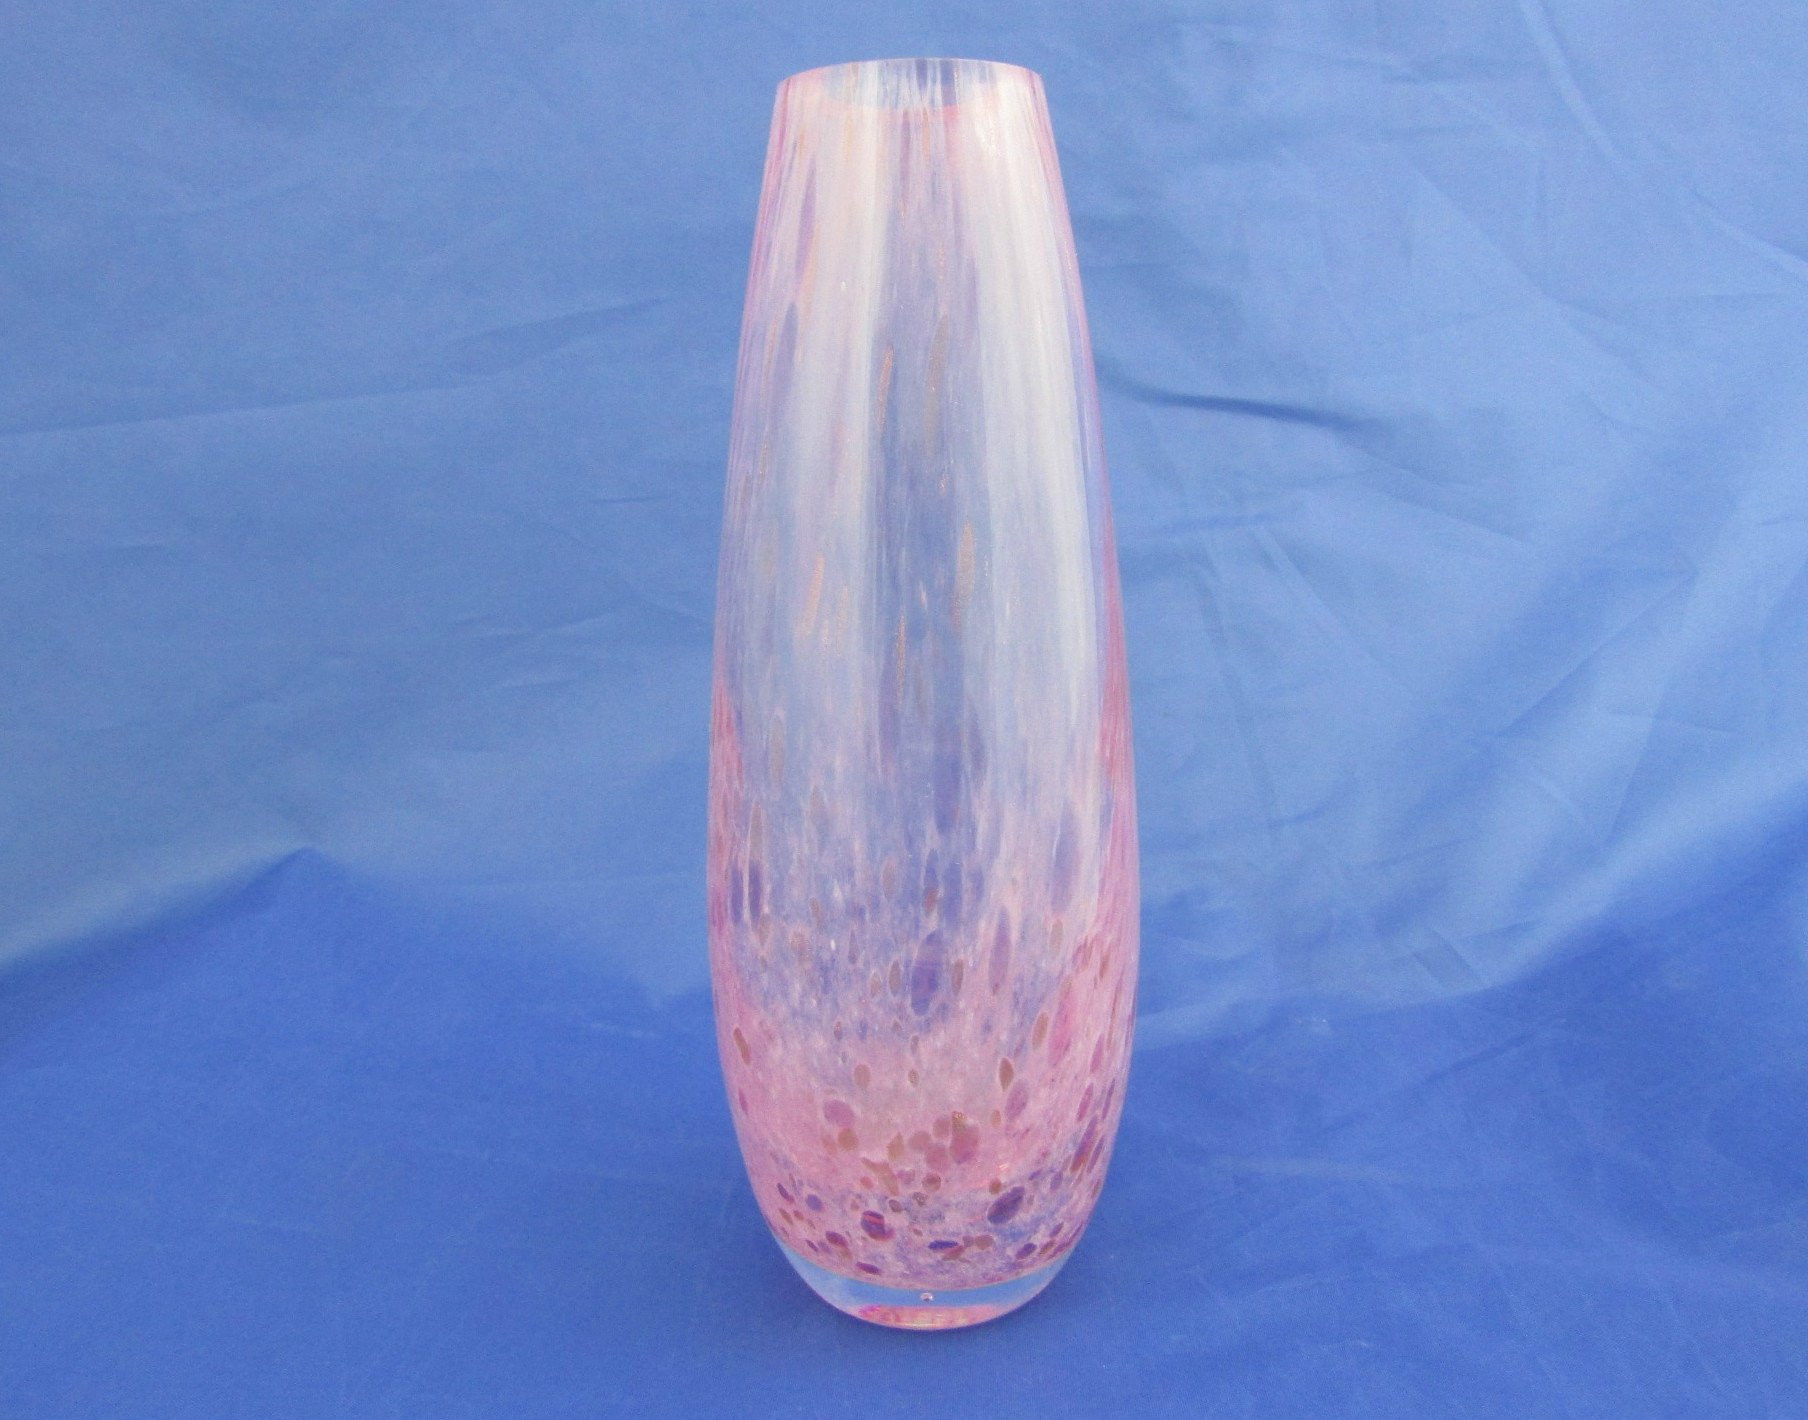 25 Trendy 30 Inch Glass Vases 2024 free download 30 inch glass vases of caithness glass vase teardrop shaped vase pink spatter glass etsy intended for dc29fc294c28ezoom